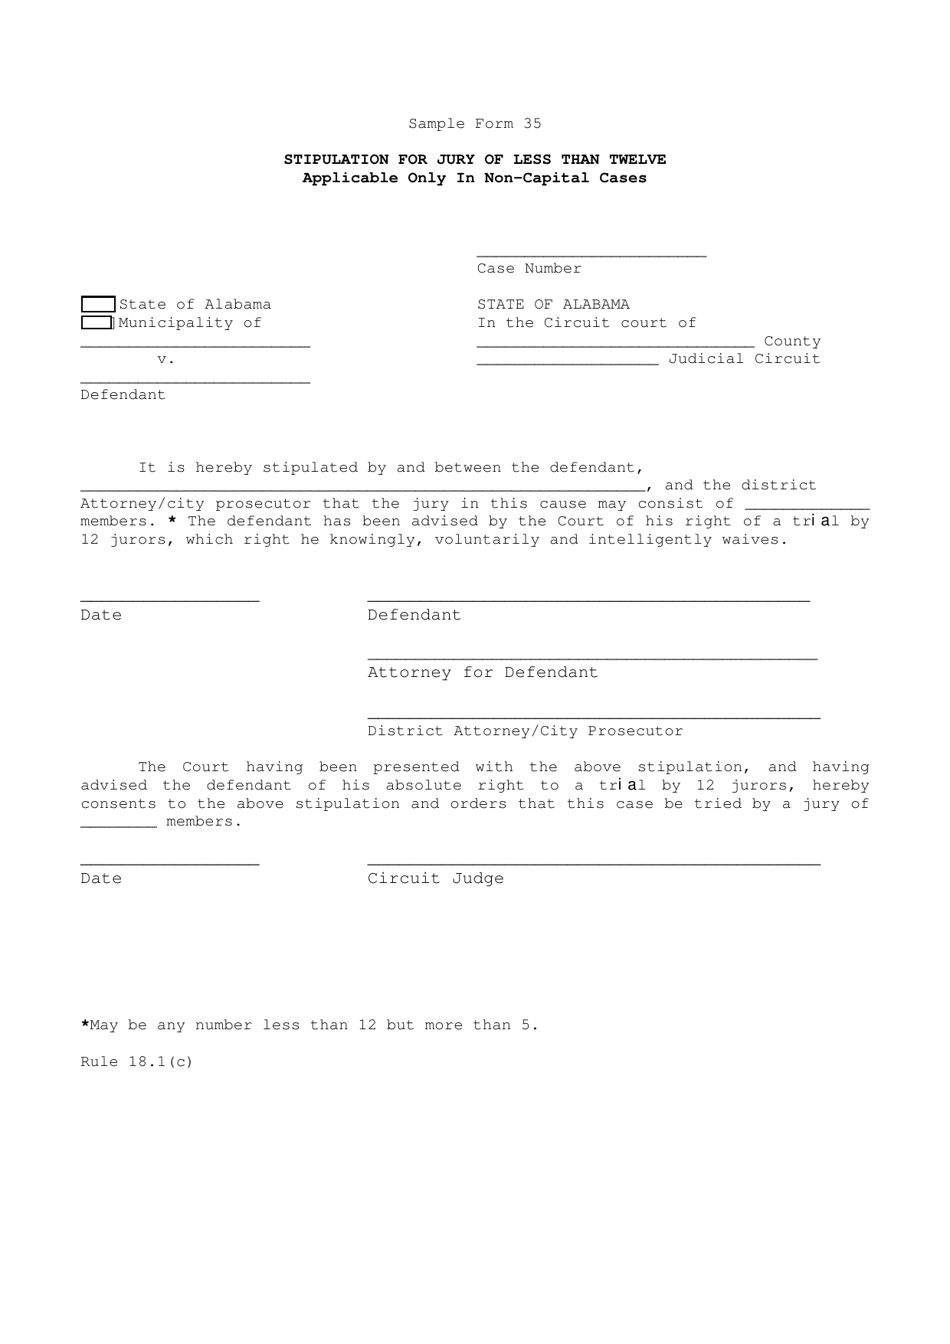 Sample Form 35 Stipulation for Jury of Less Than Twelve Applicable Only in Non-capital Cases - Alabama, Page 1